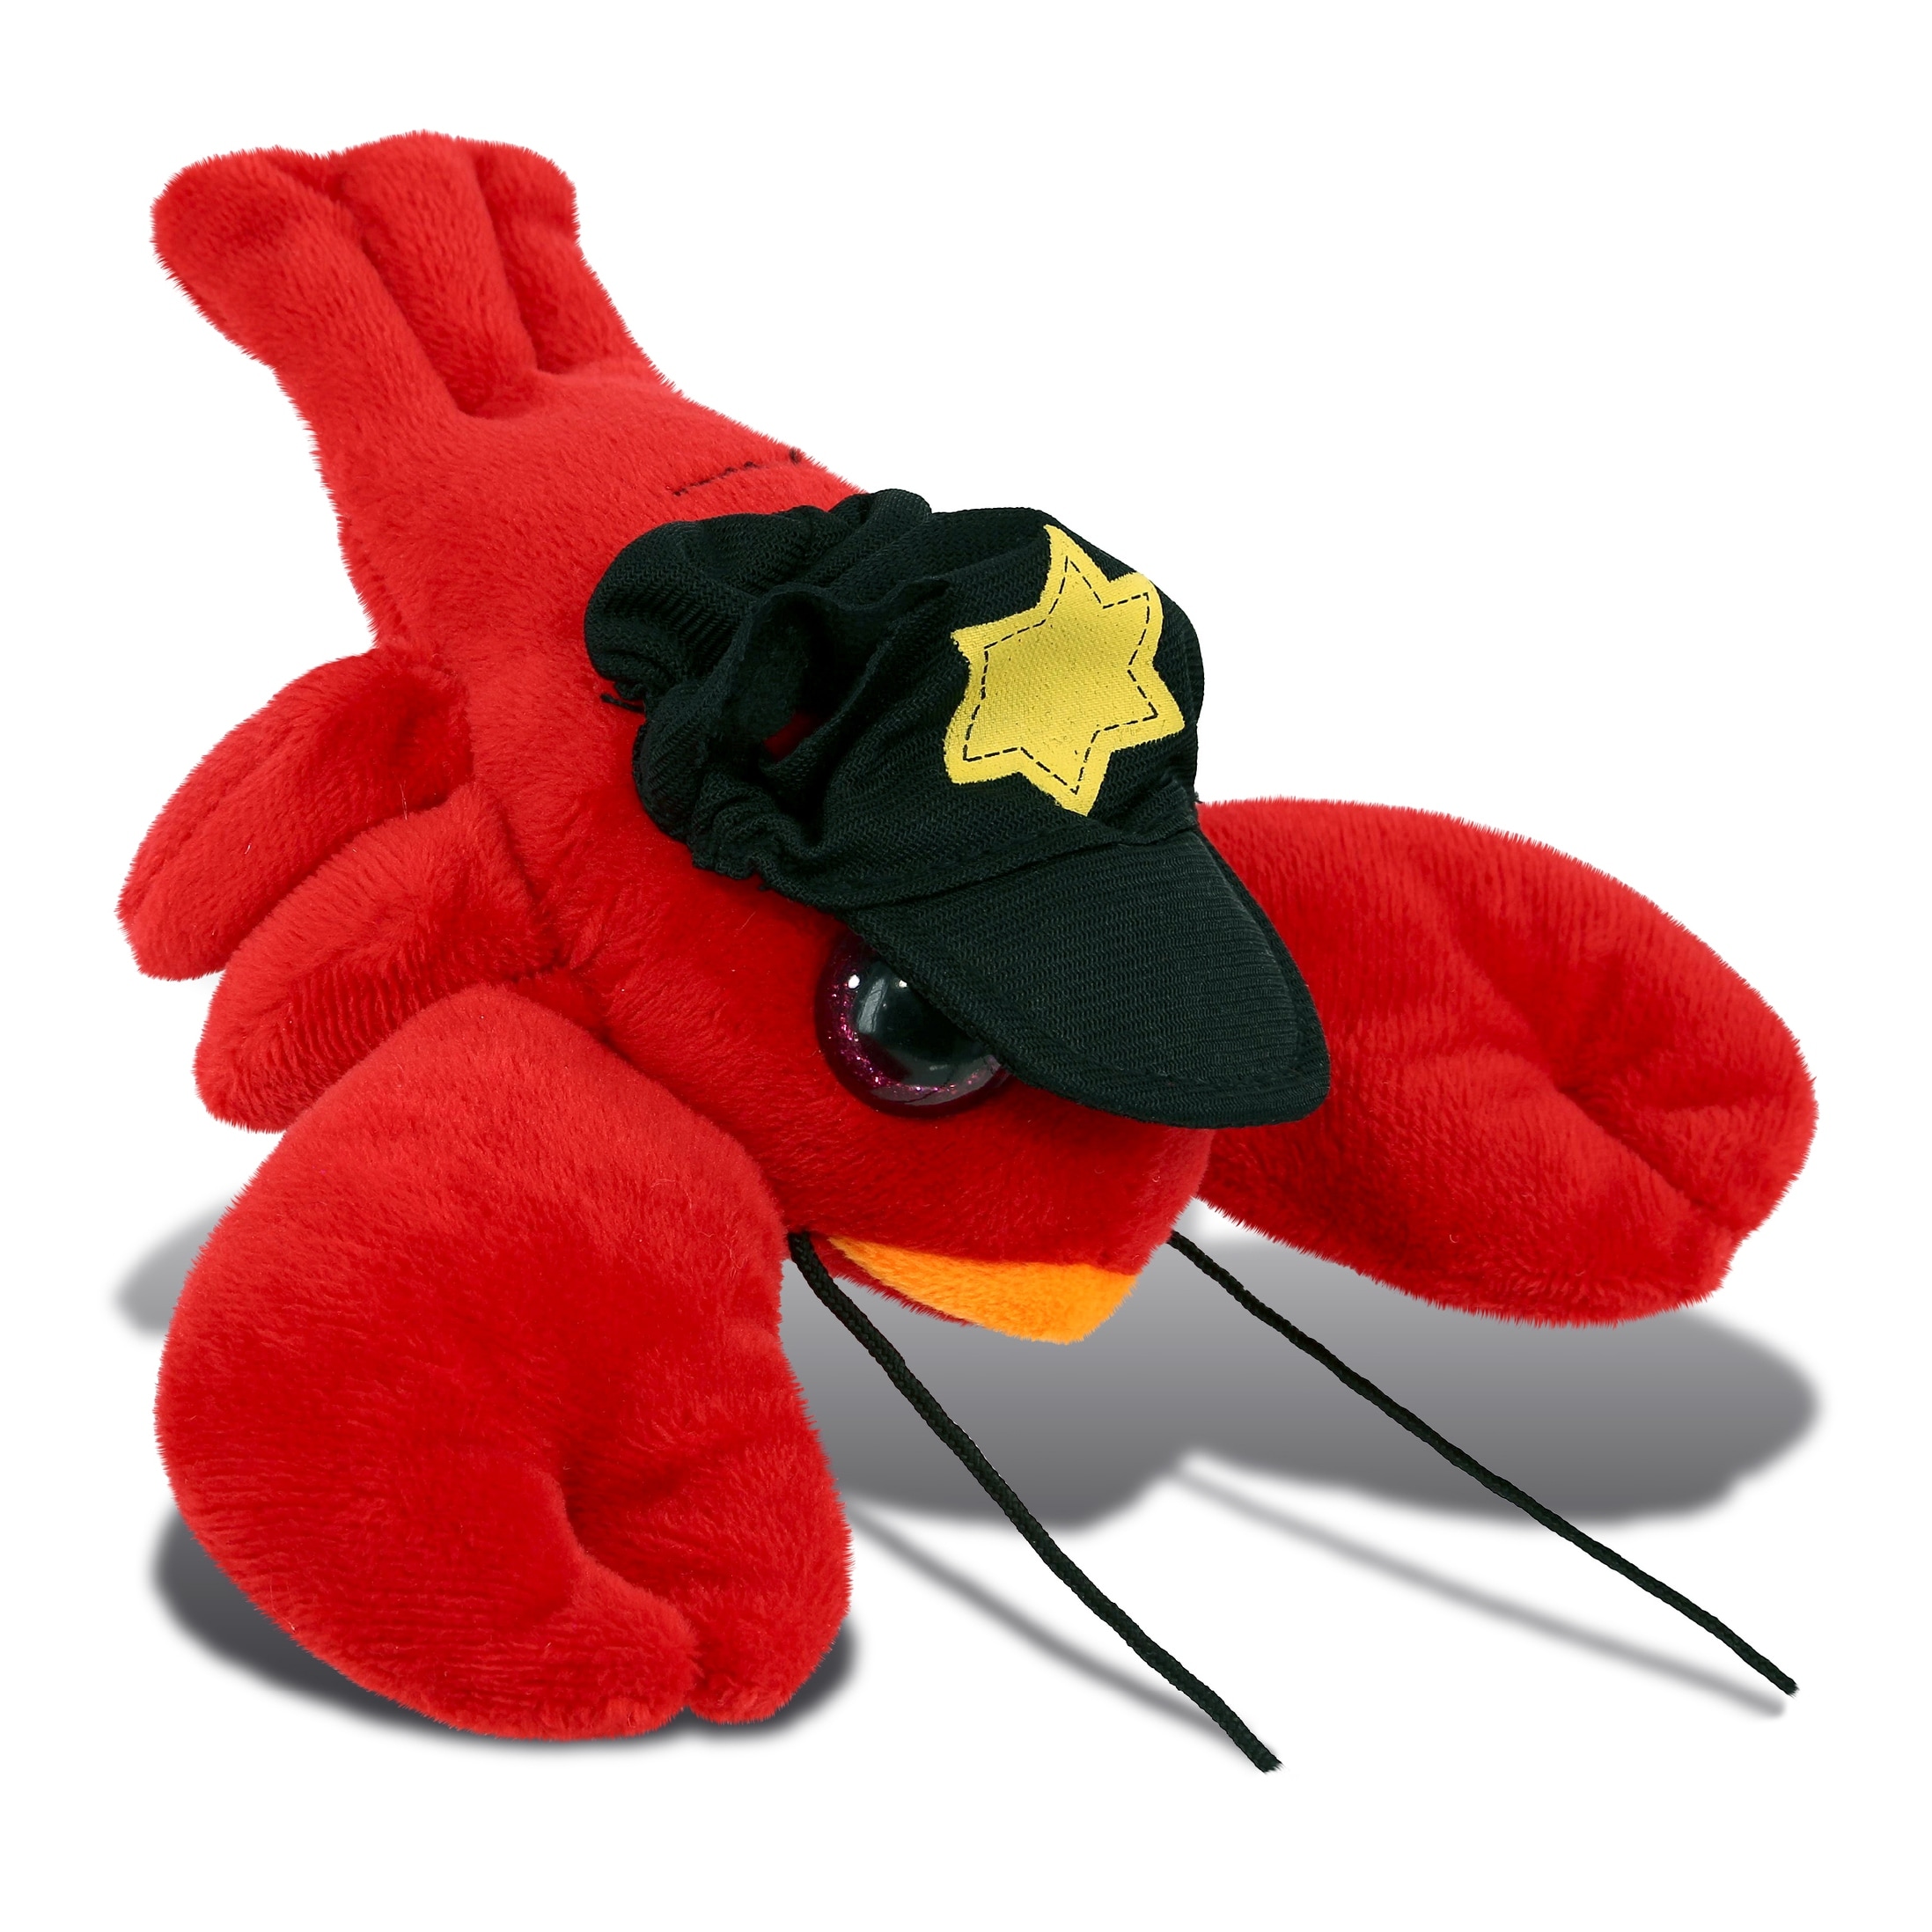 DolliBu Red Lobster Big Eye Police Officer Plush Toy with Cop Cap - 6 inches